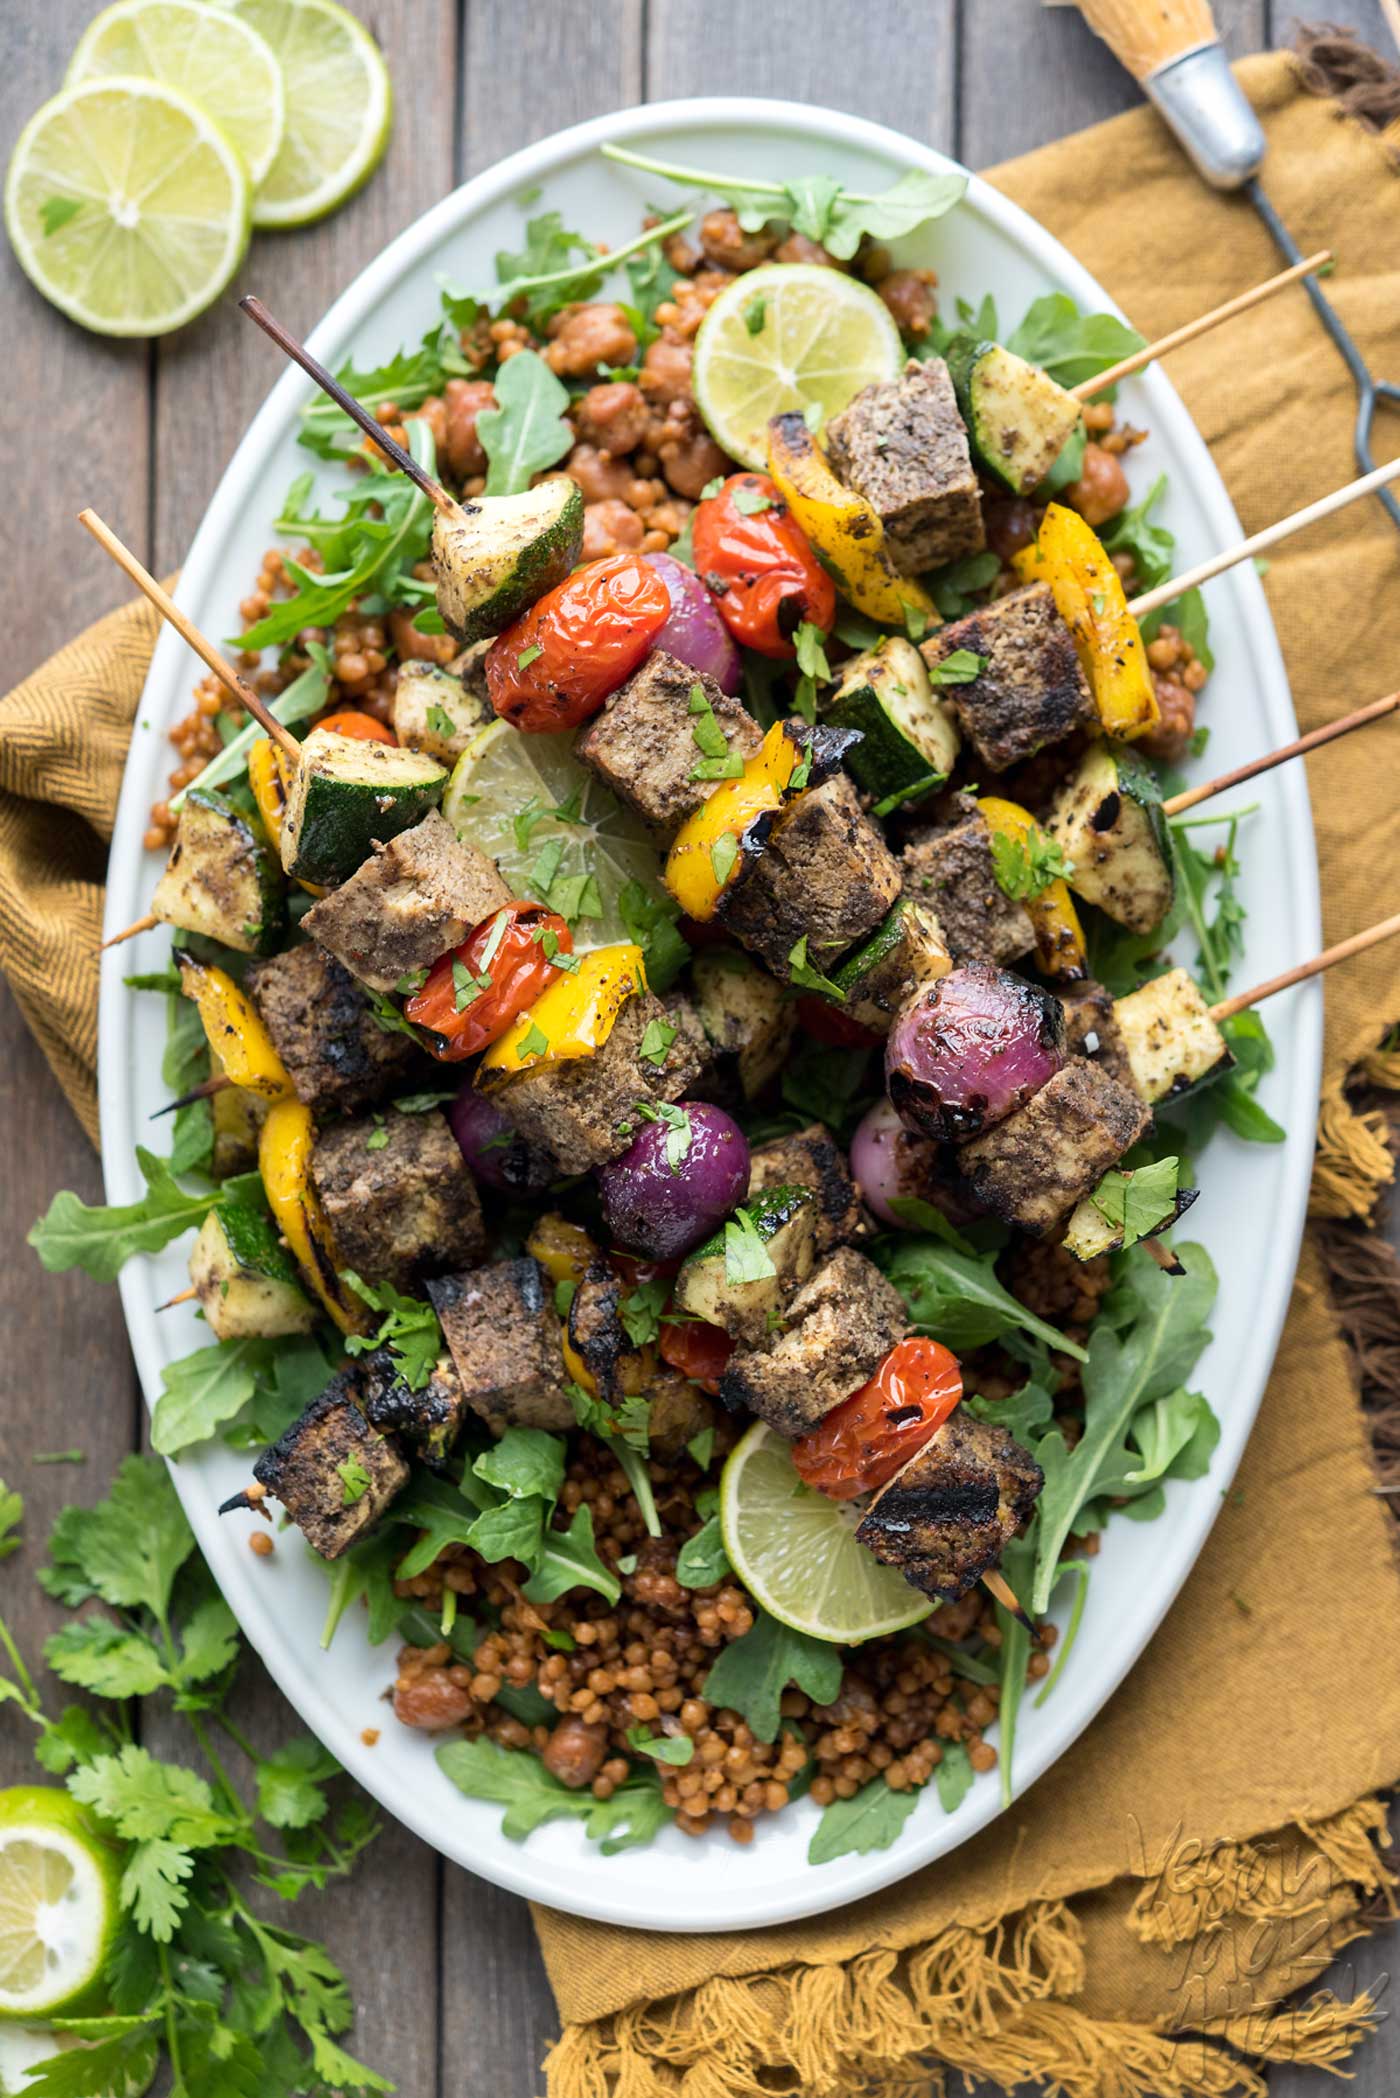 Grilled Tofu Shawarma Skewers! Perfect for Summer grilling, and made easily with Wild Garden’s marinade. #vegan #veganyackattack #wildgardeneats